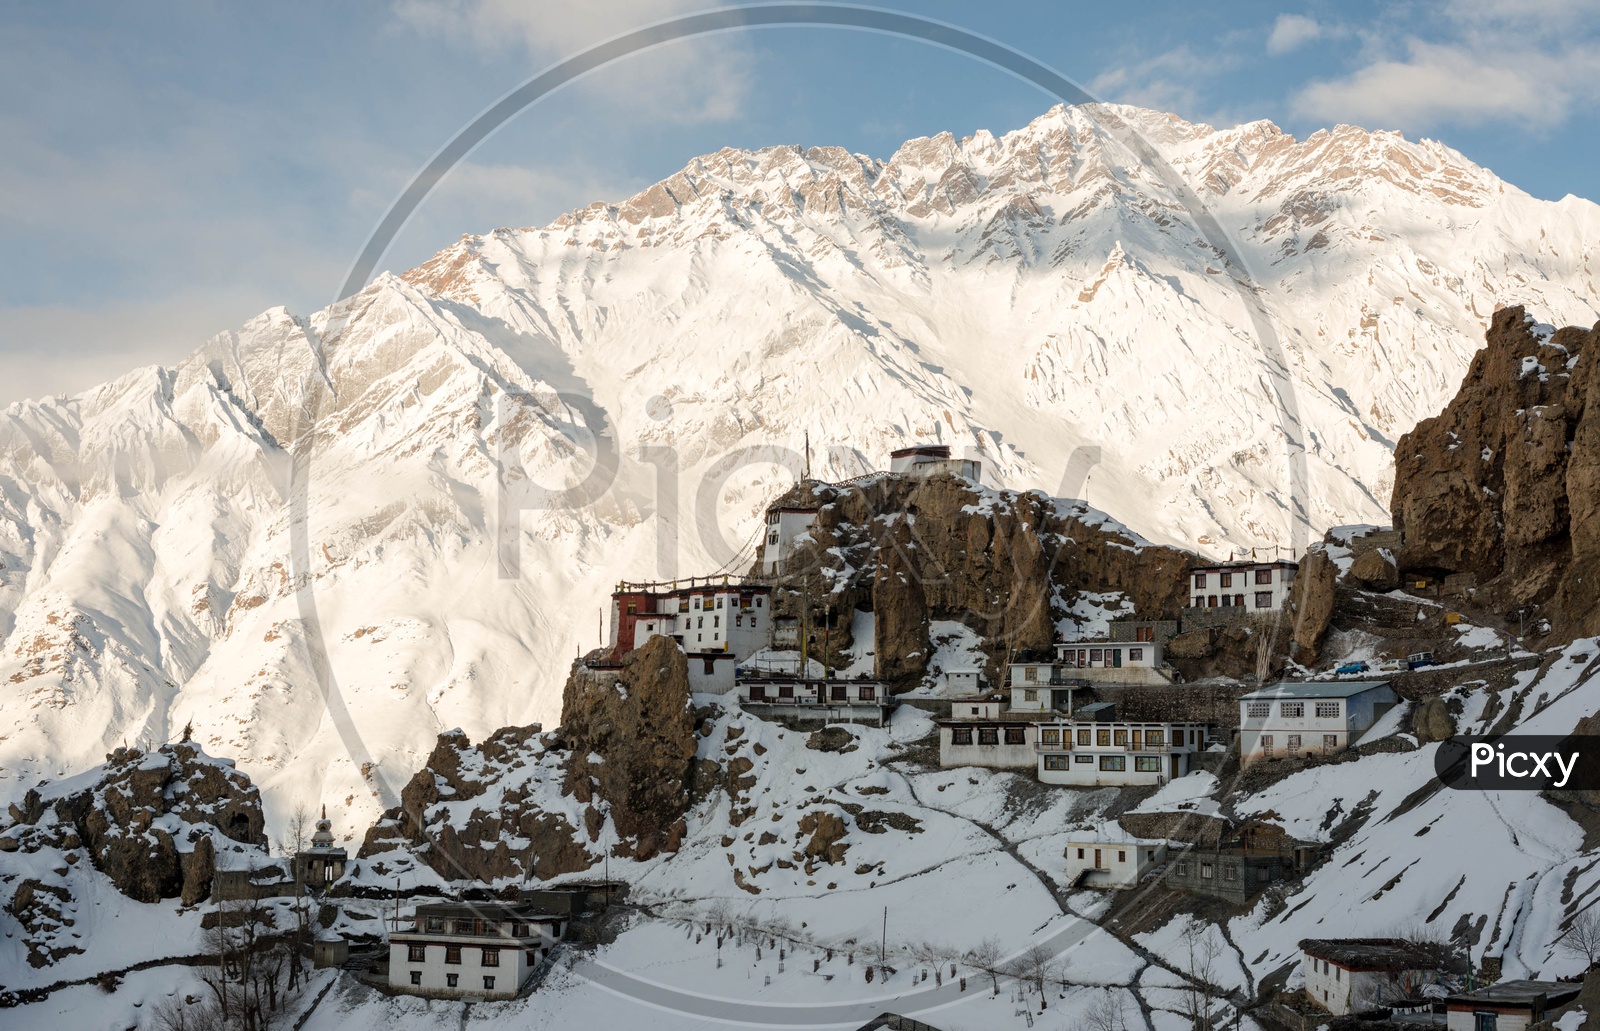 Dhankar Village on Mountain Covered in Snow with Snowy Himalaya Mountains in Background